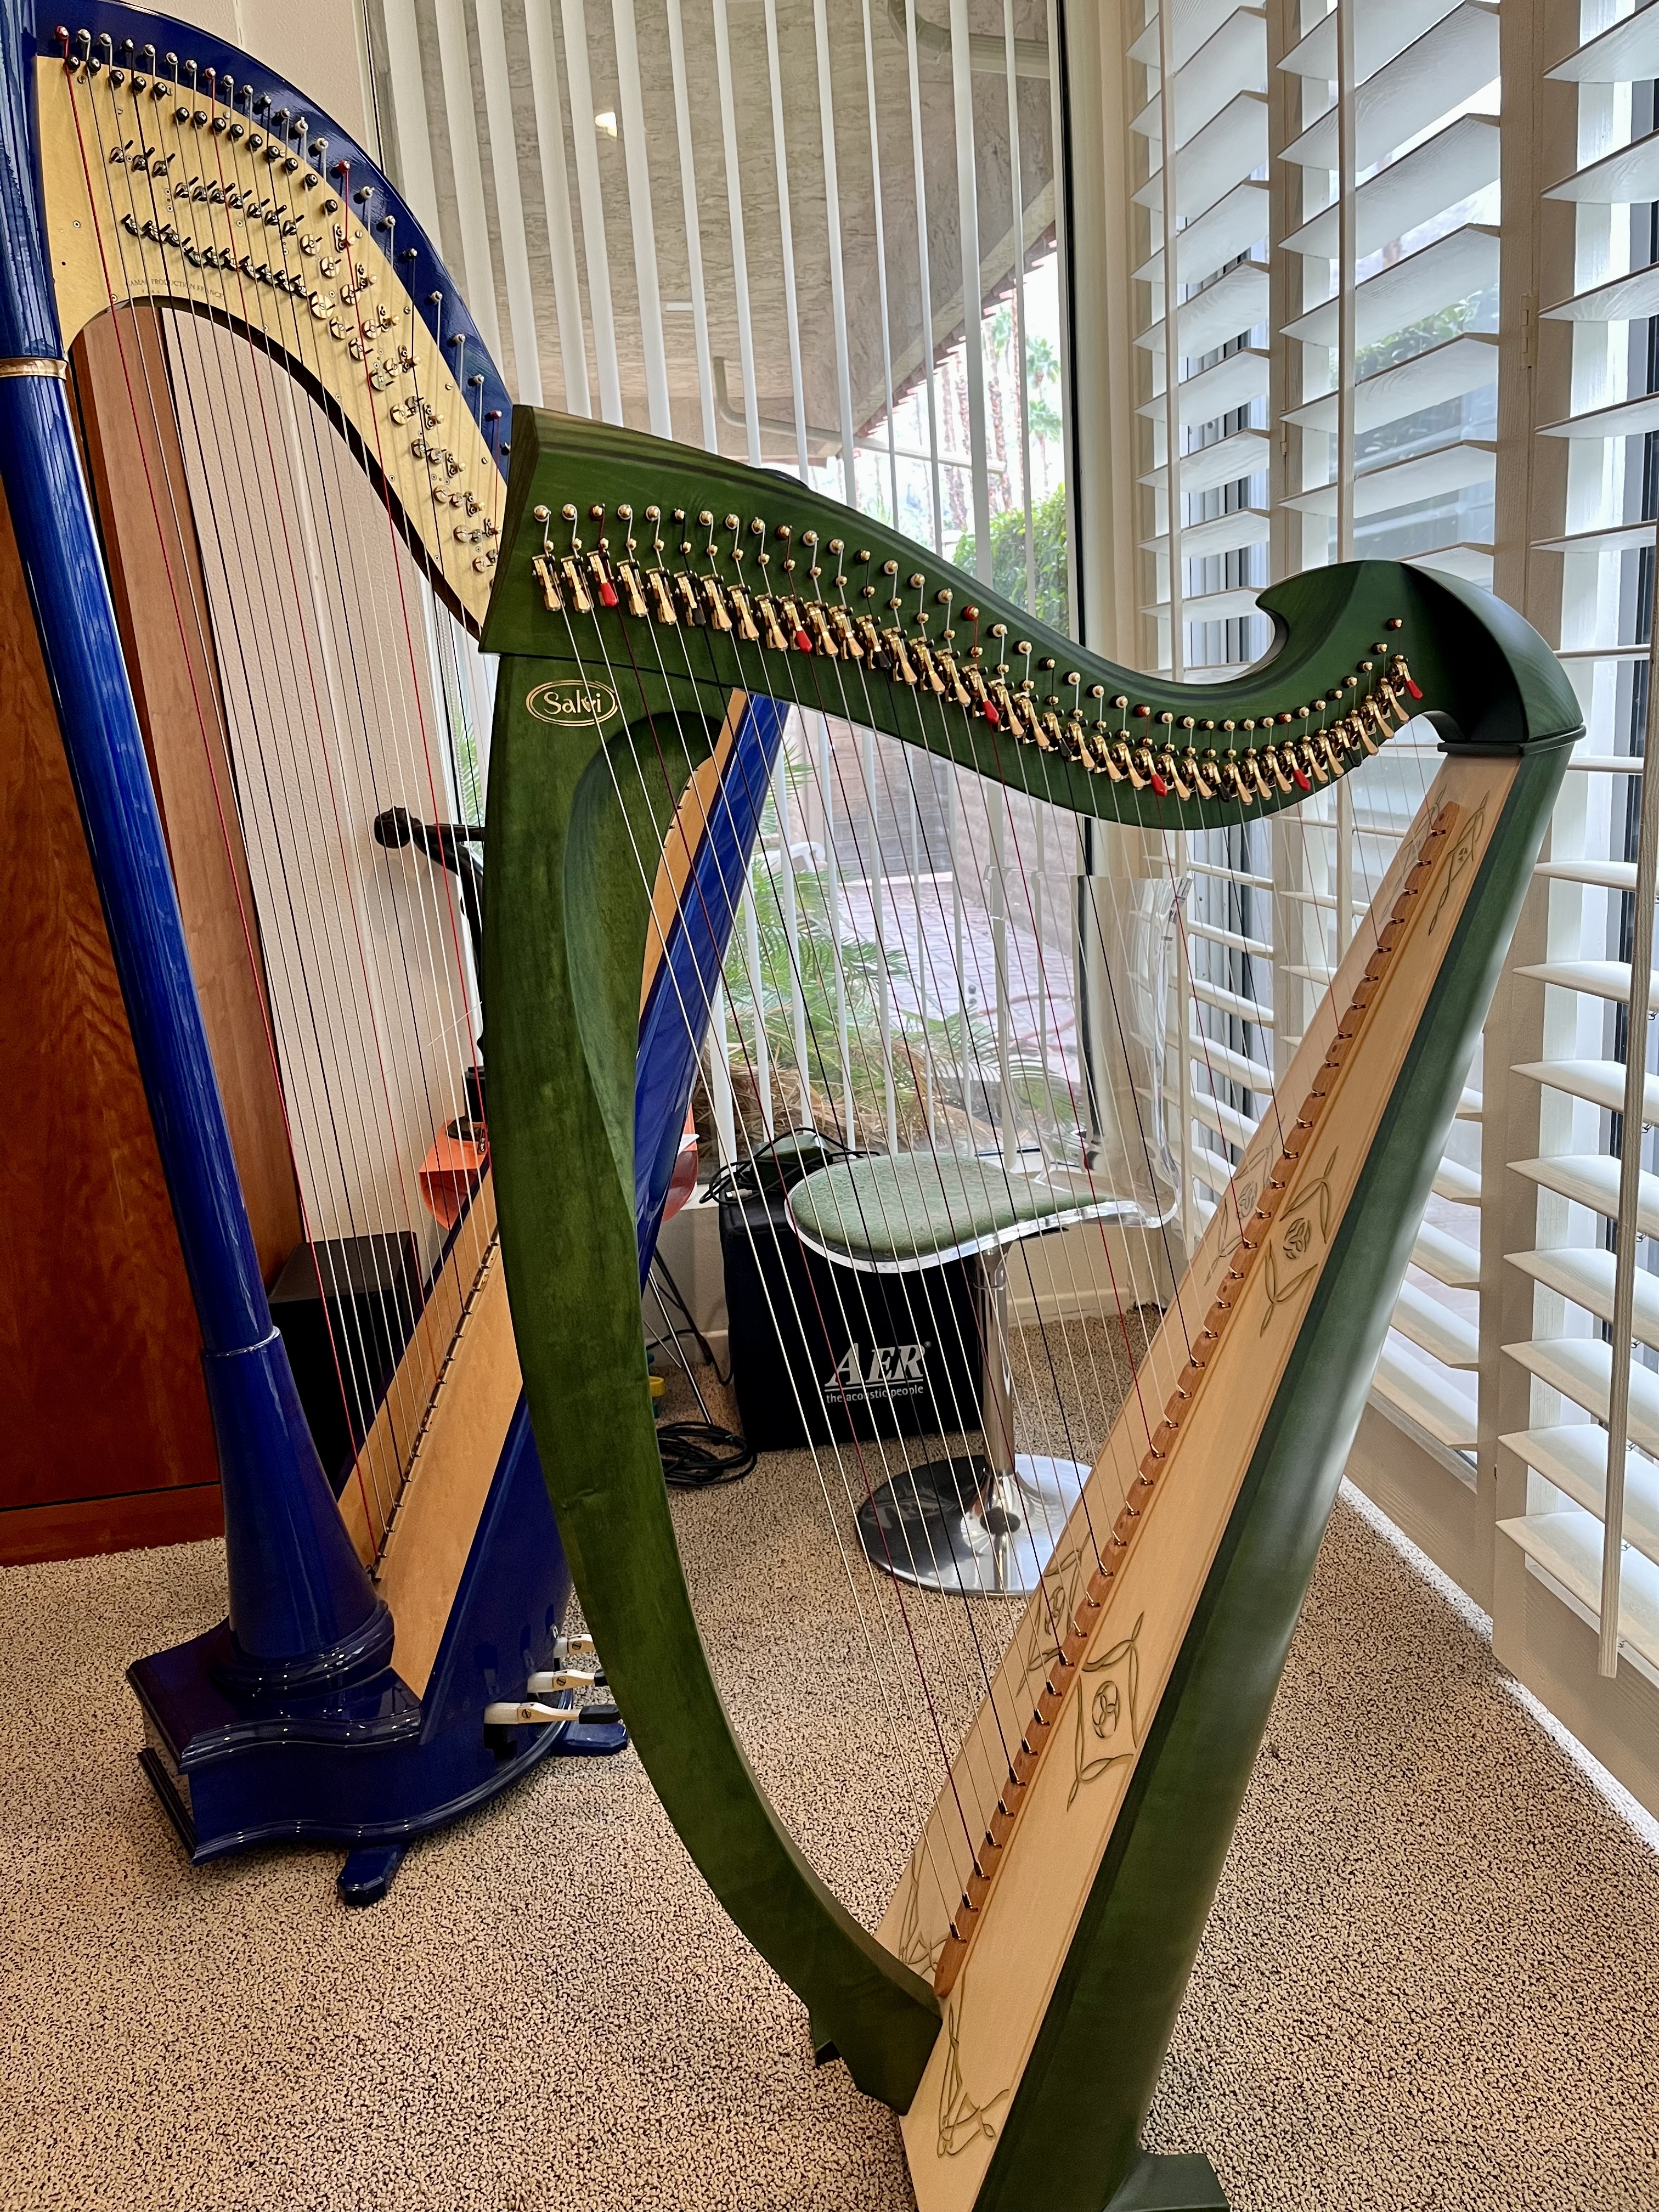 Blue and Green Electric Harps